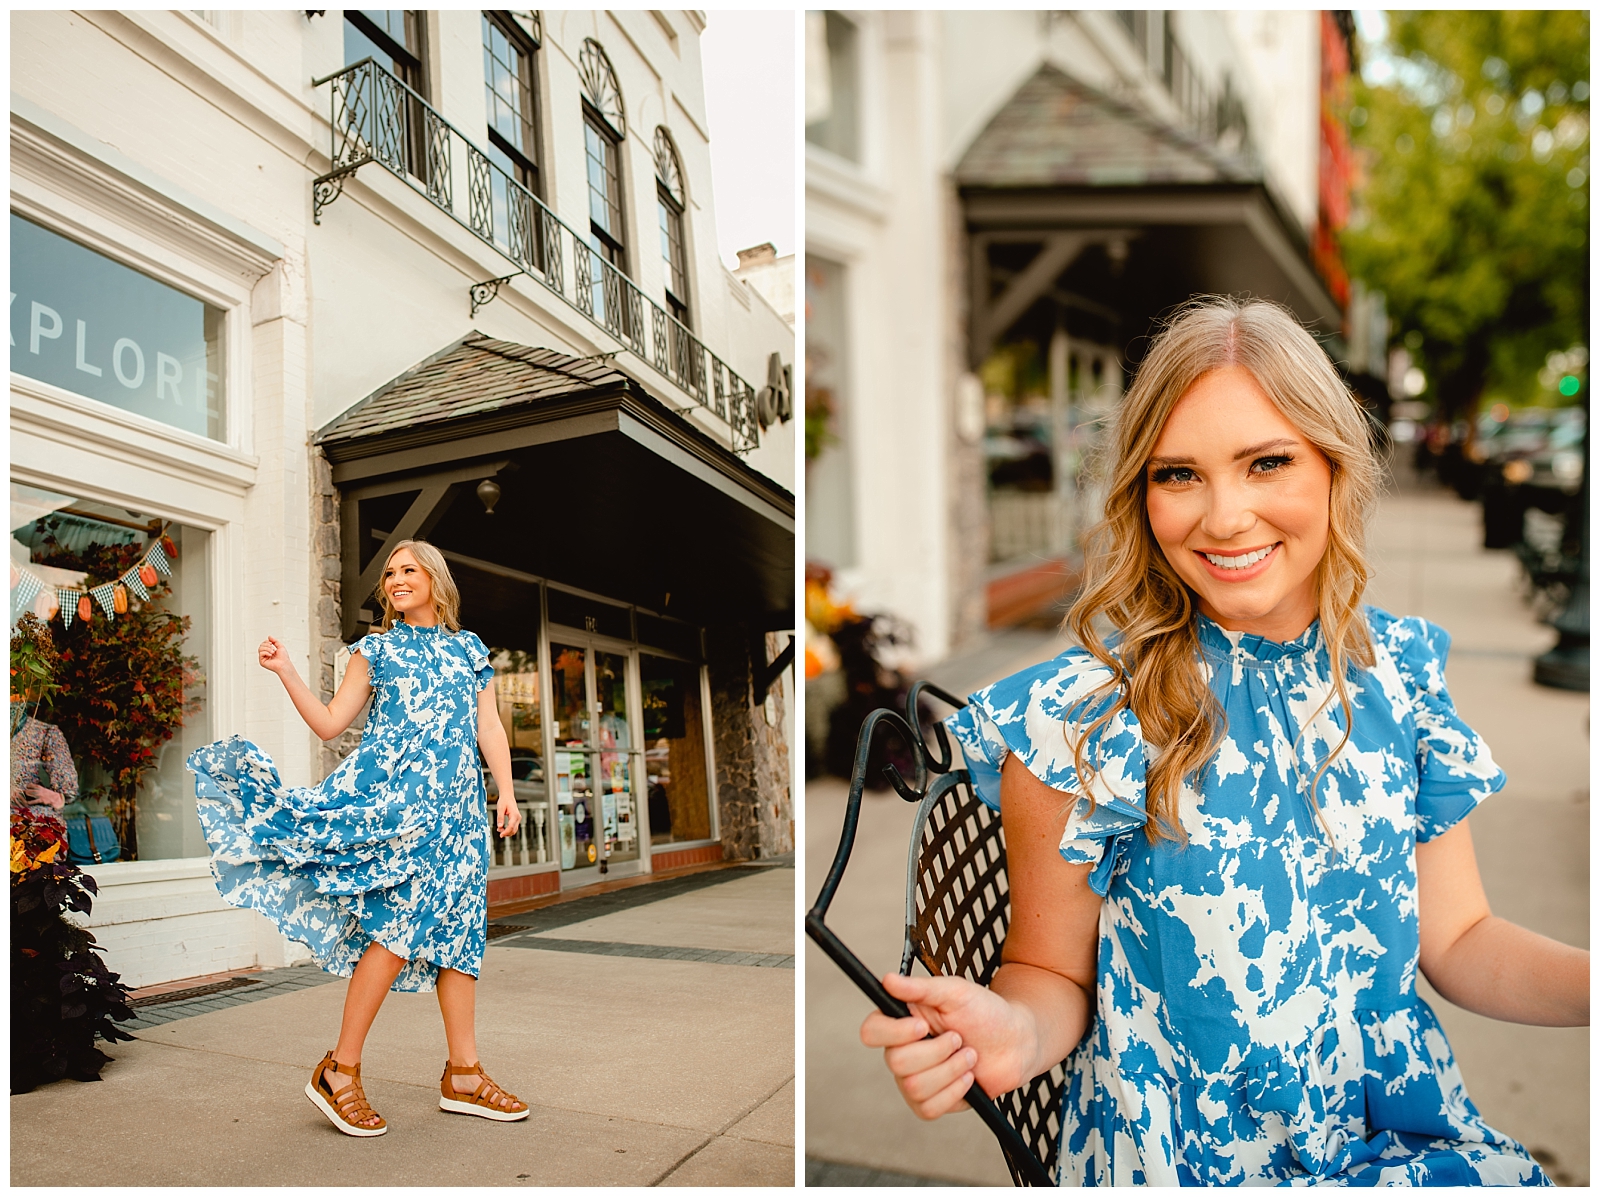 Historic downtown location for senior pictures in Thomasville, Georgia.